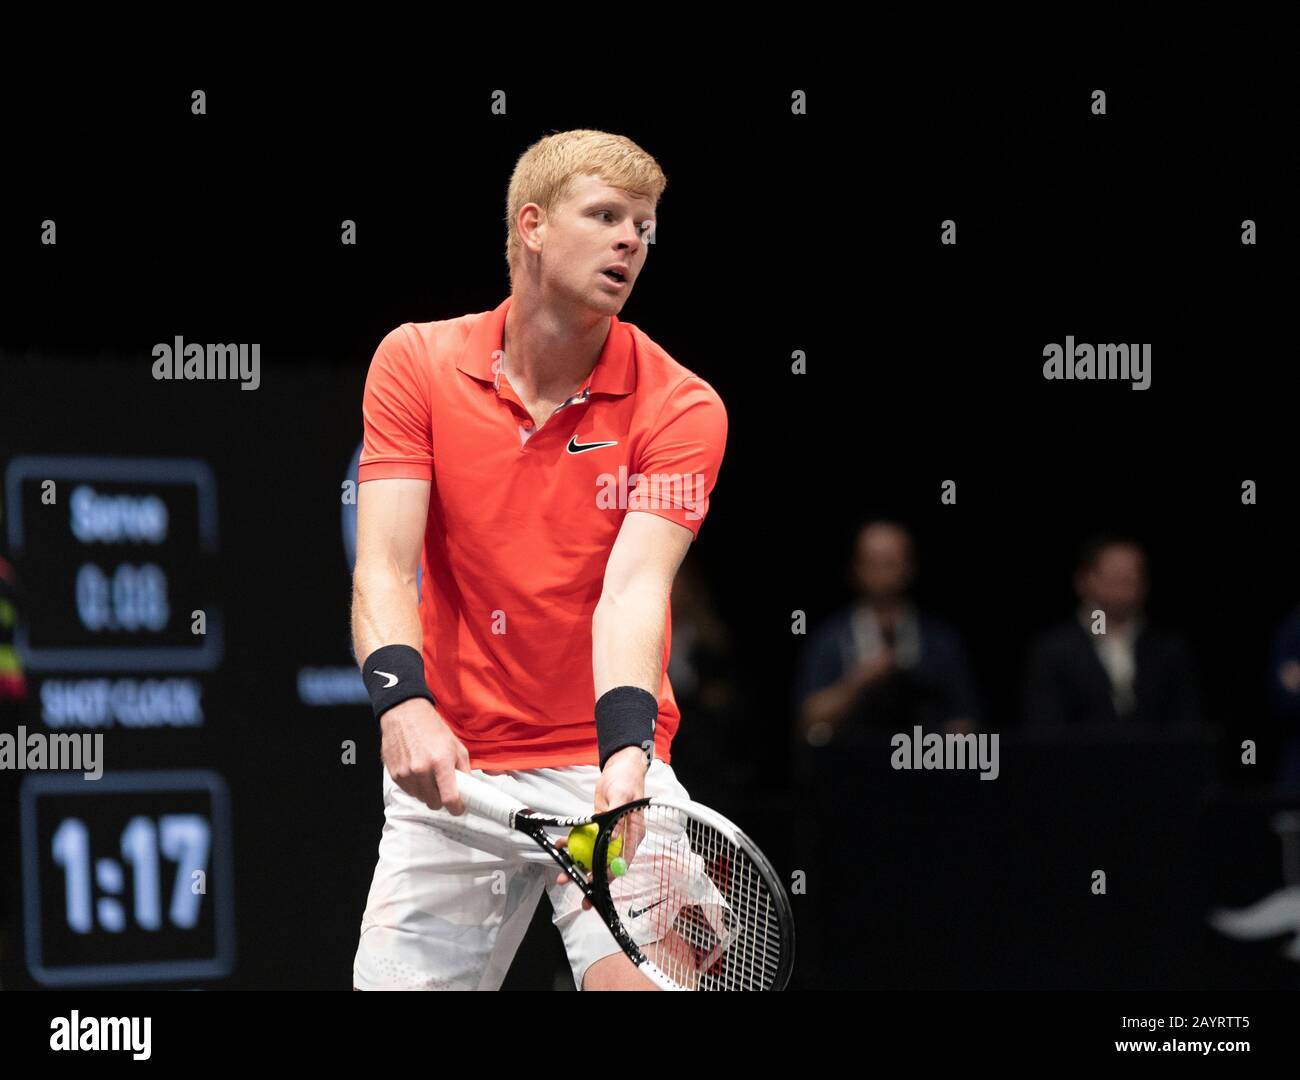 Hempstead, NY - February 16, 2020: Kyle Edmund of Great Britain serves during final against Andreas Seppi of Italy at ATP 250 New York Open 2020 tennis tournament at Nassau Coliseum, Edmund won Stock Photo